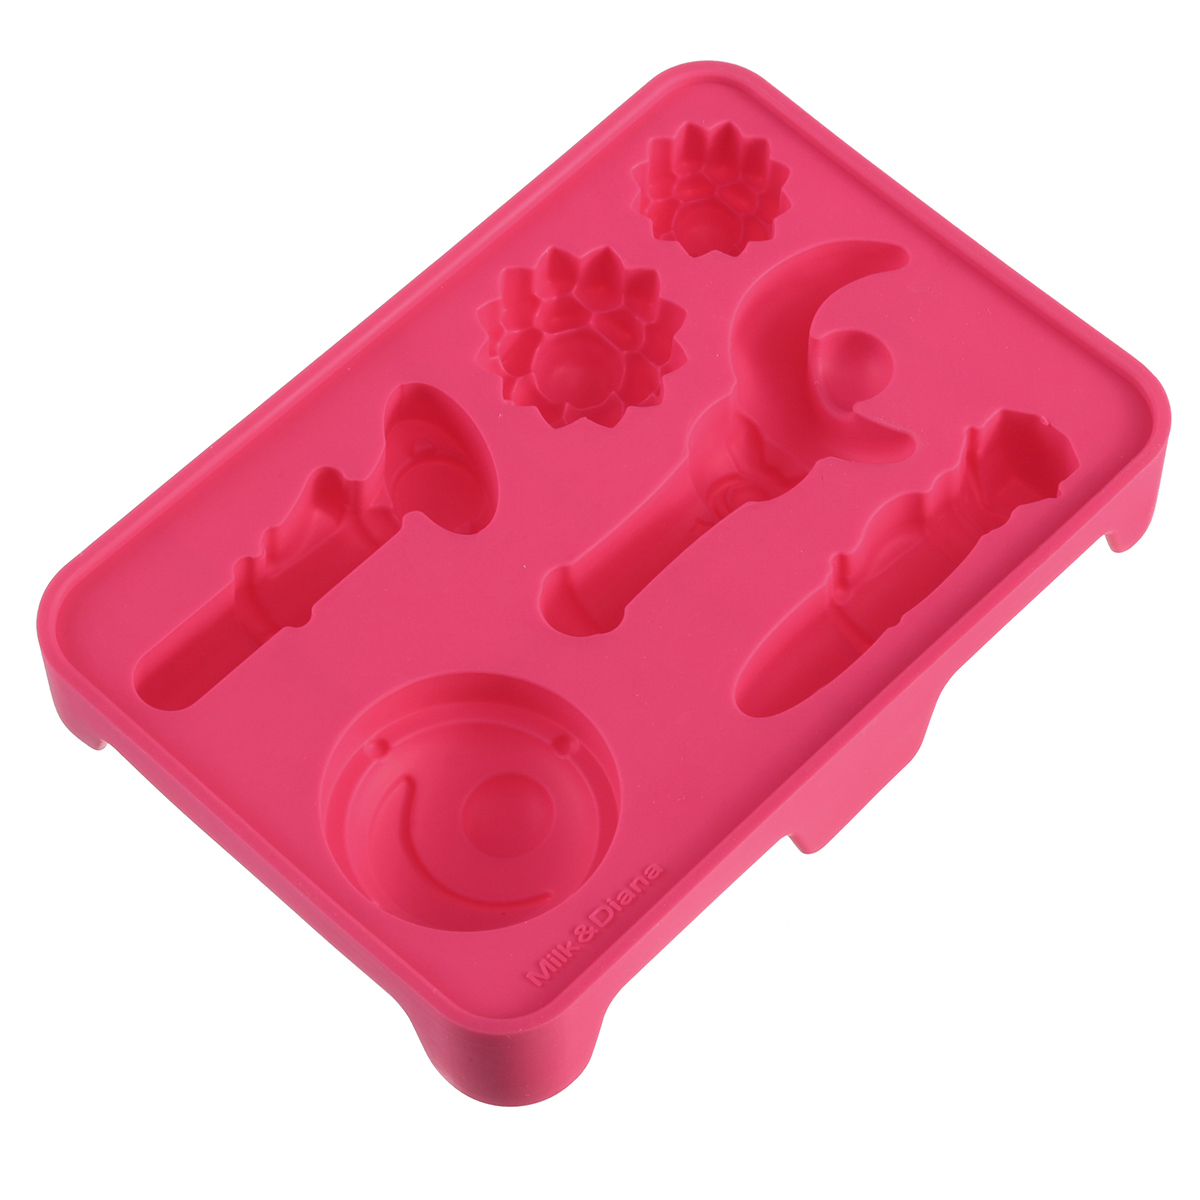 

DIY Silicone Mold Chocolate Ice Cube Solid Mould Gift Props For 3D Sailor Moon